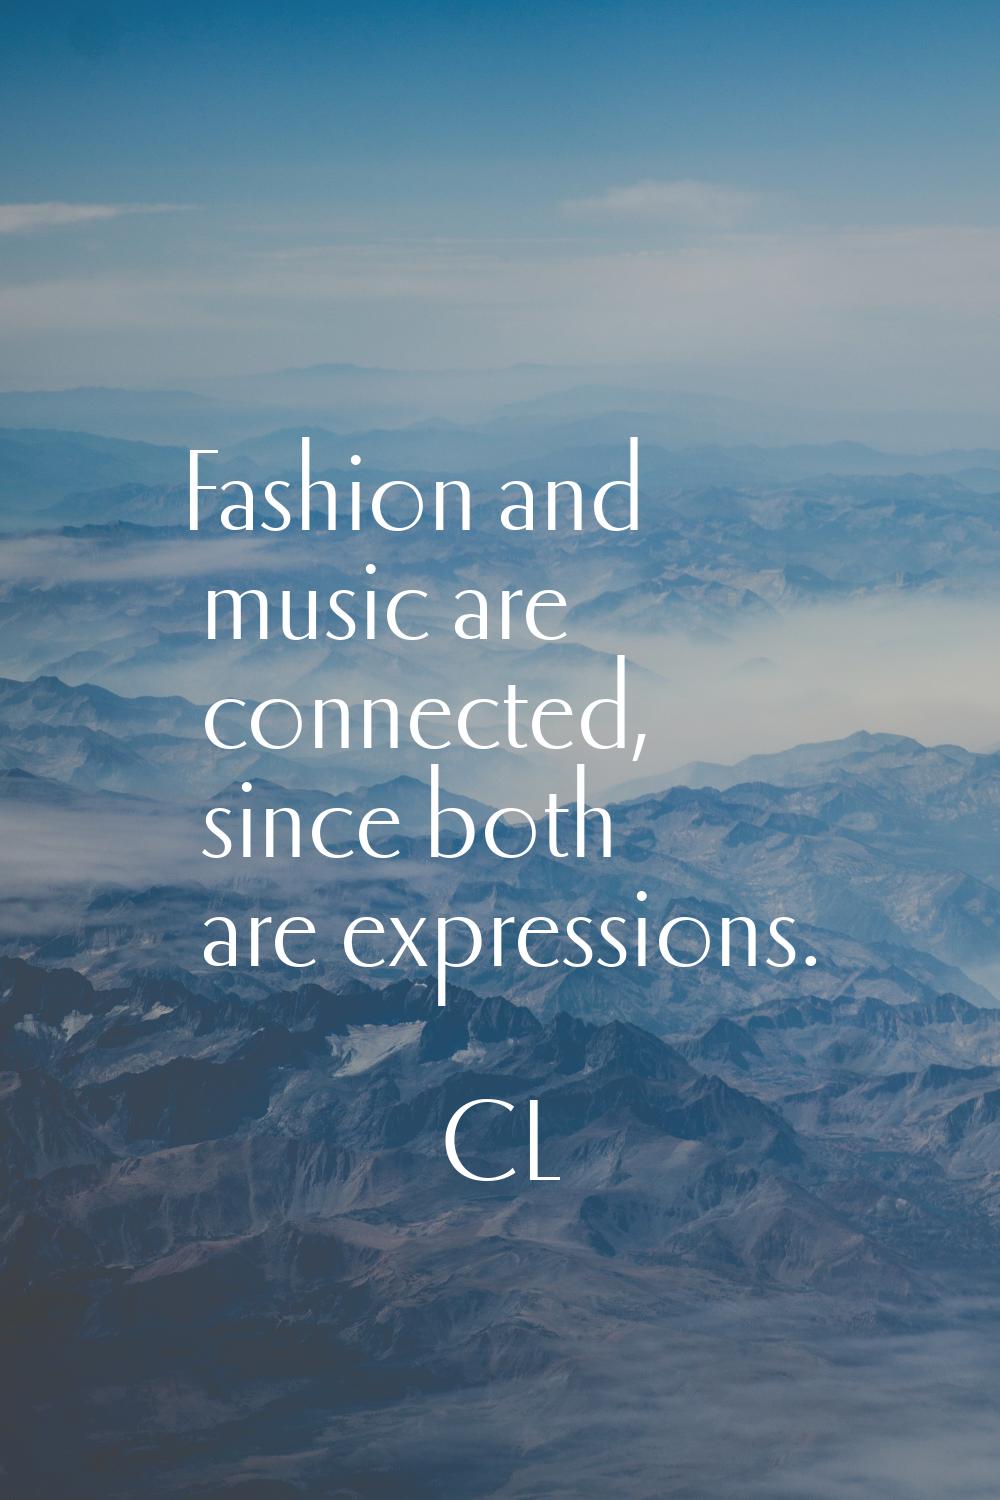 Fashion and music are connected, since both are expressions.